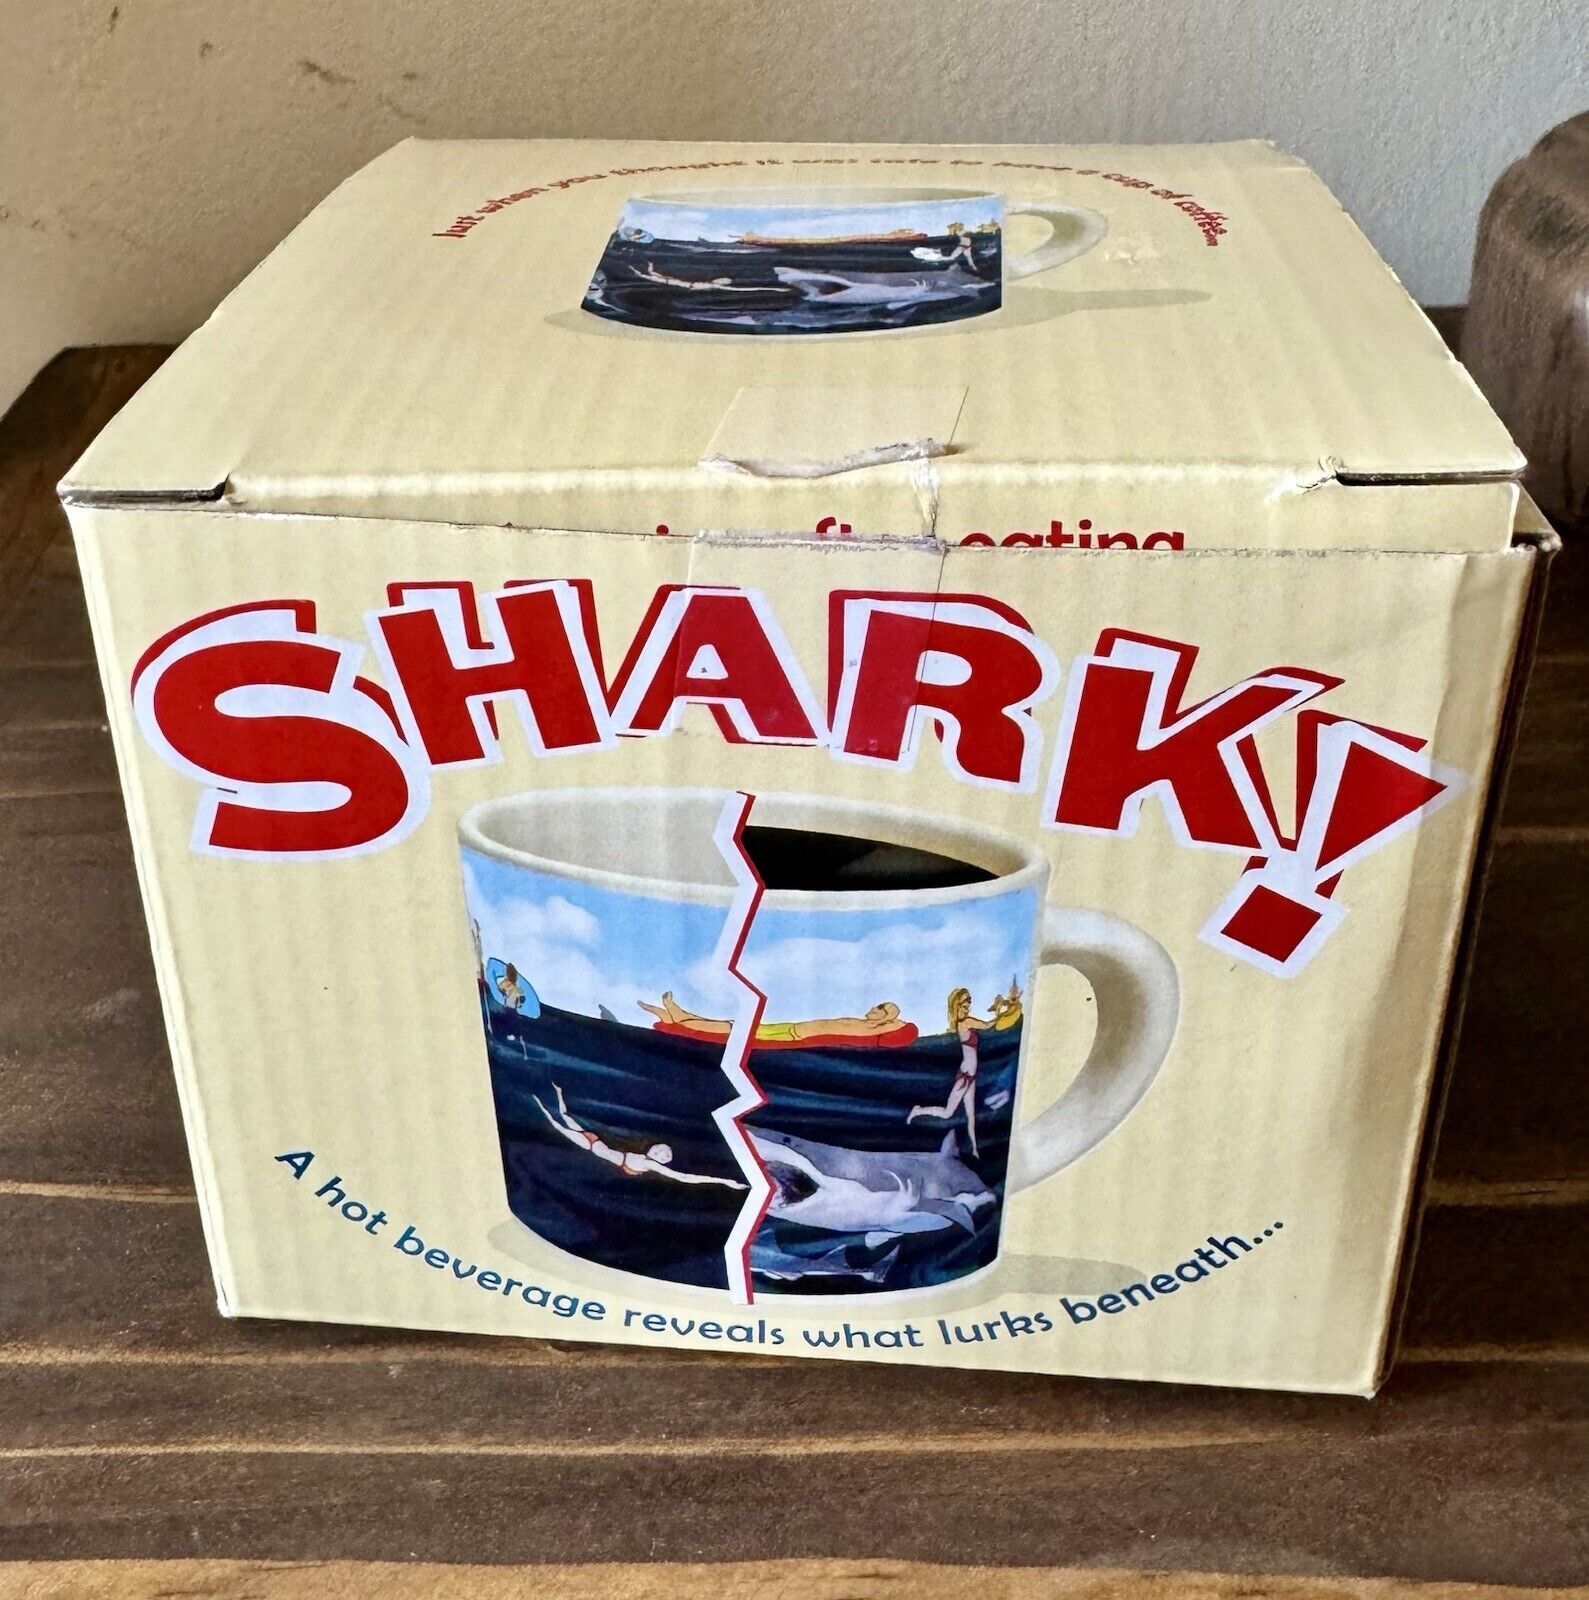 Shark Attack Coffee Mug Hot Beverage Activated Reveals What Lurks Beneath New